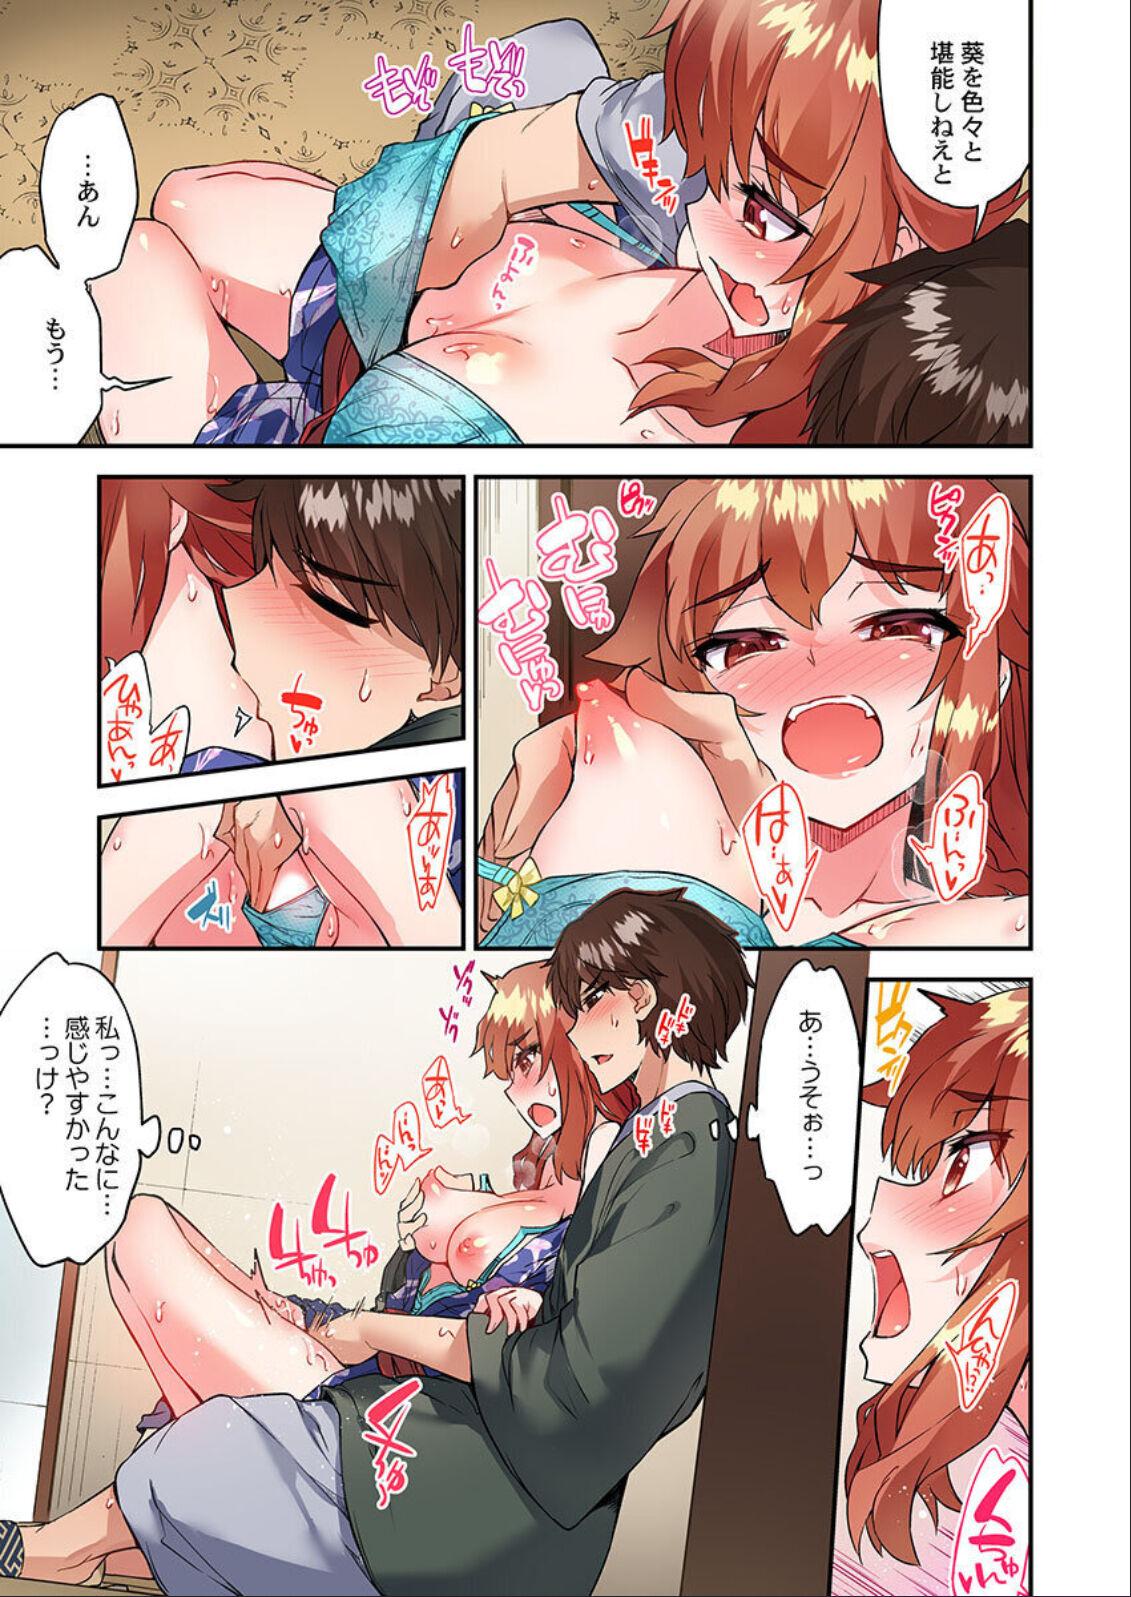 Traditional Job Of Washing Girls' Body Ch. 45-51 and brand new CH. 57 141